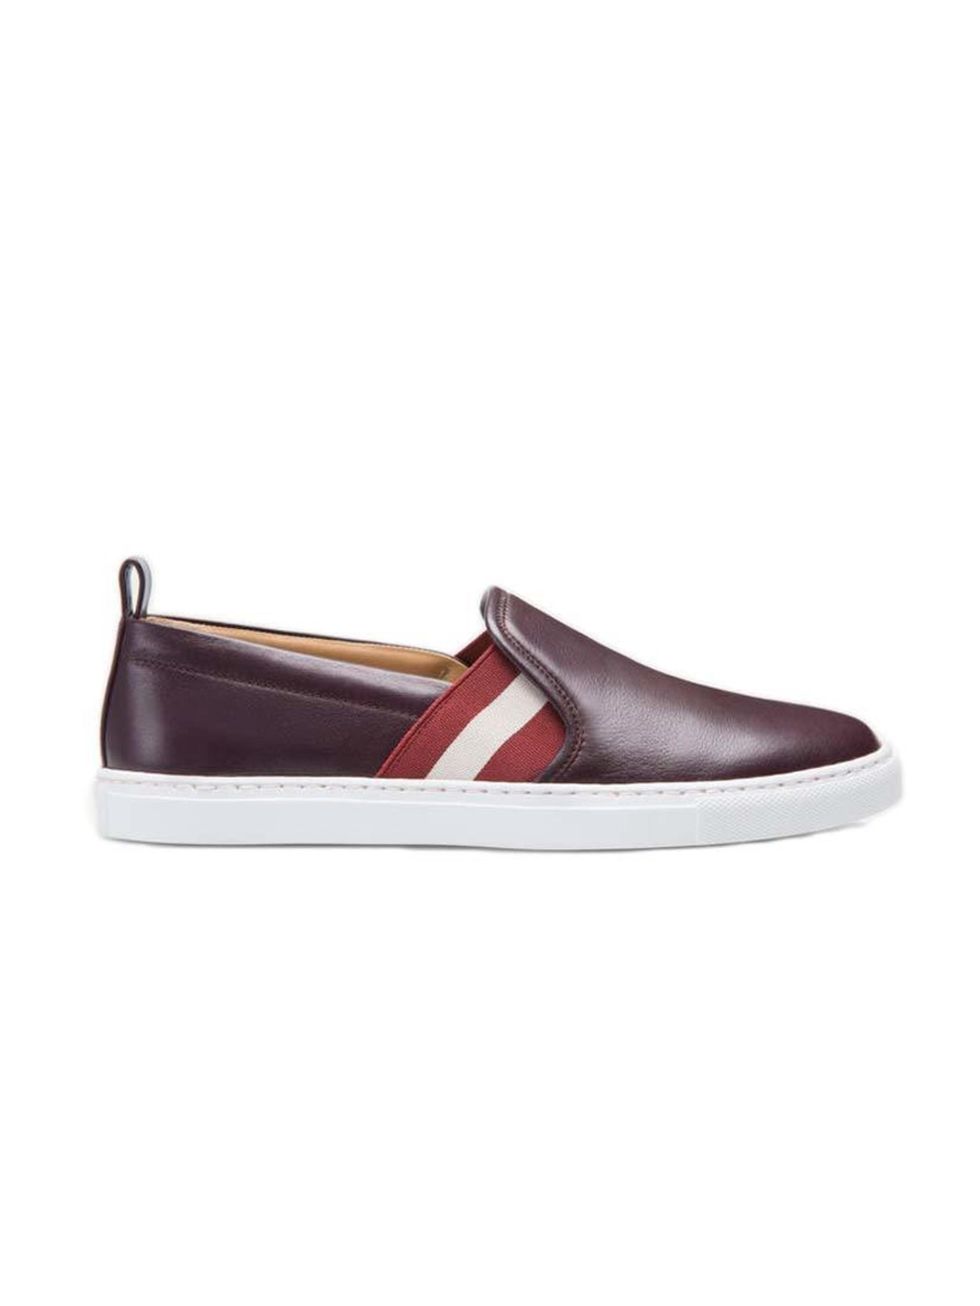 <p>A grown-up take on retro sportswear; trainers for women who don't do trainers. </p>

<p><a href="http://www.bally.co.uk/en_gb/shop-woman/shoes/henrika-women%C2%B4s-leather-slip-on-trainer-in-cherry--6196031.html?cgid=woman-shoes&srule=Product%20name%20